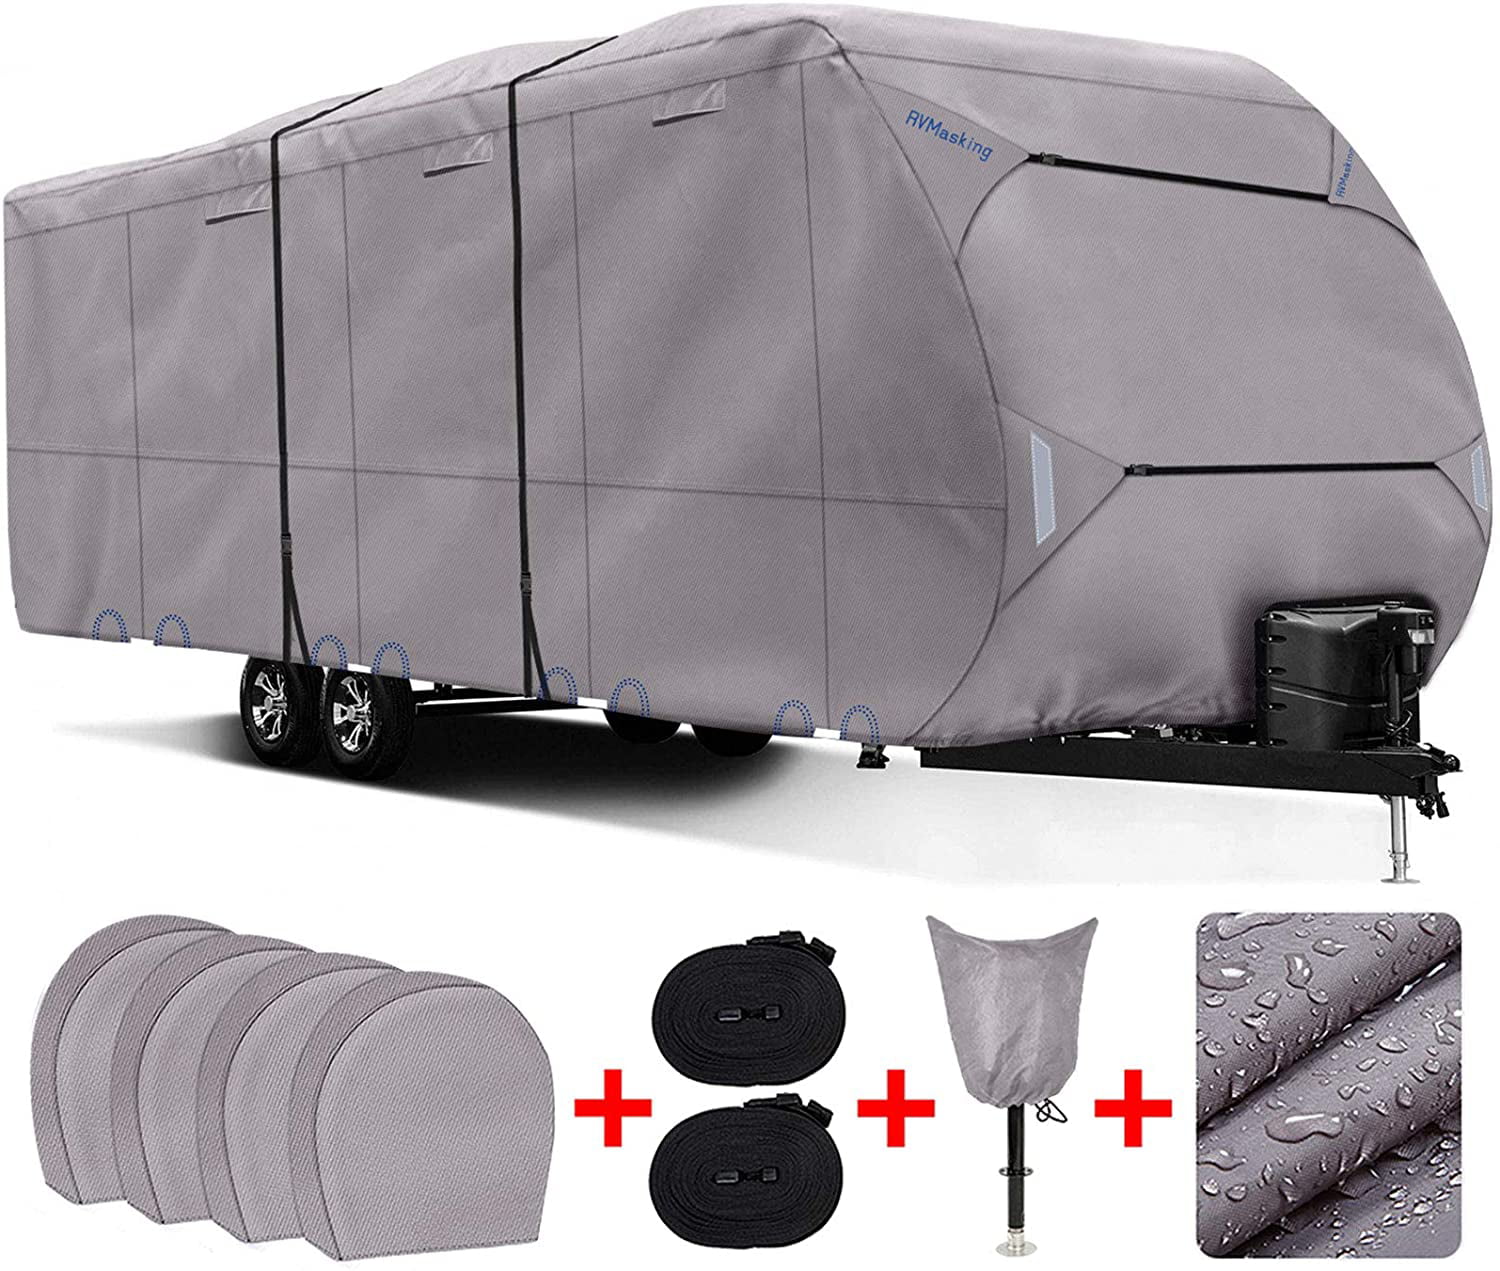 FRUNO 300D Oxford Travel Trailer RV Cover for 20-22 Camper with Tongue Jack Cover & 4 Tire Covers 